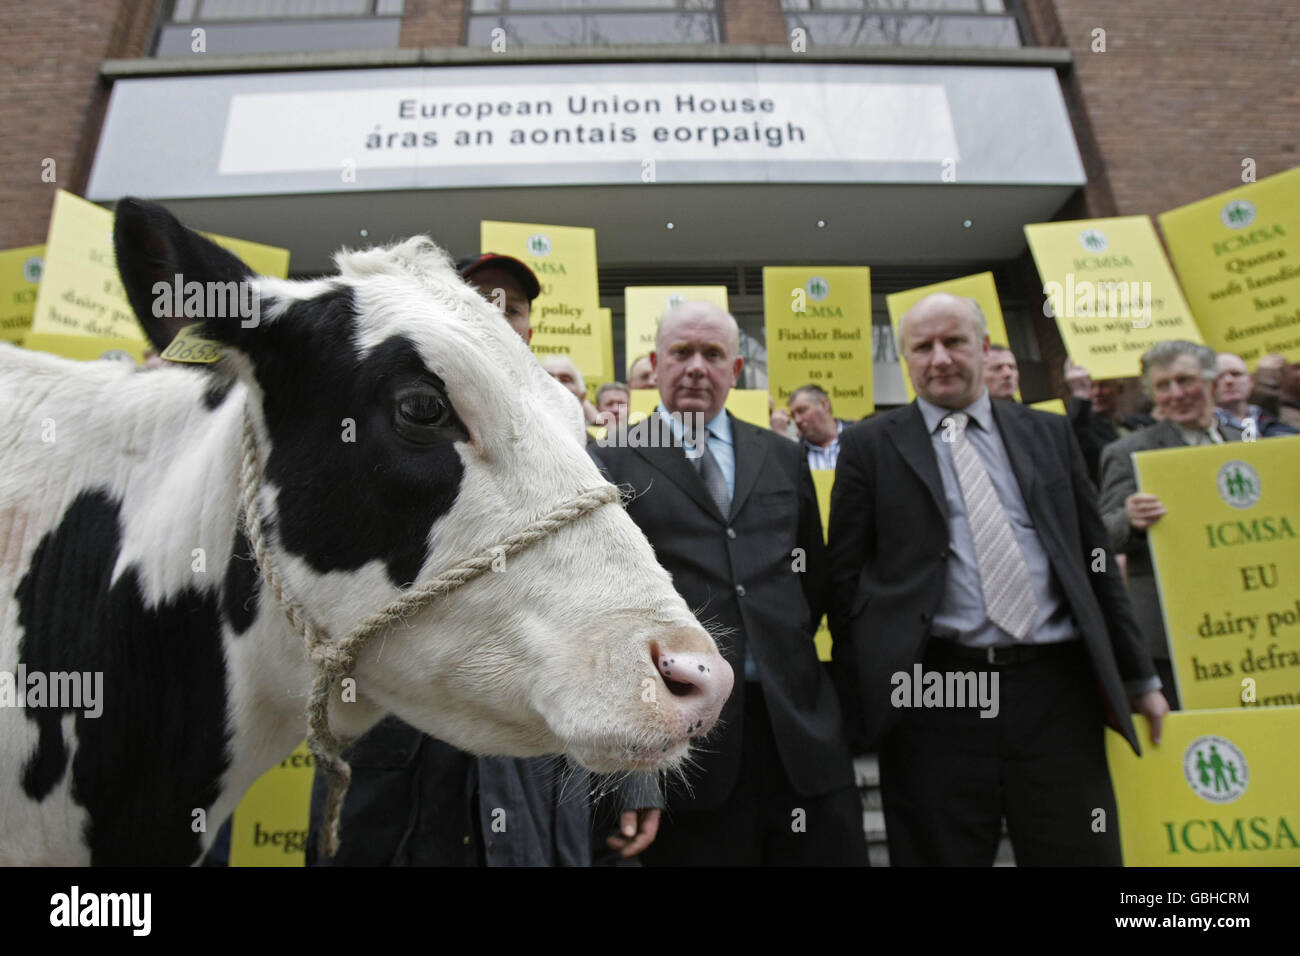 Farmers protest at EU dairy policies. Dairy farmers demonstrate at the EU office in Dublin today in protest at the collapse in milk prices. Stock Photo